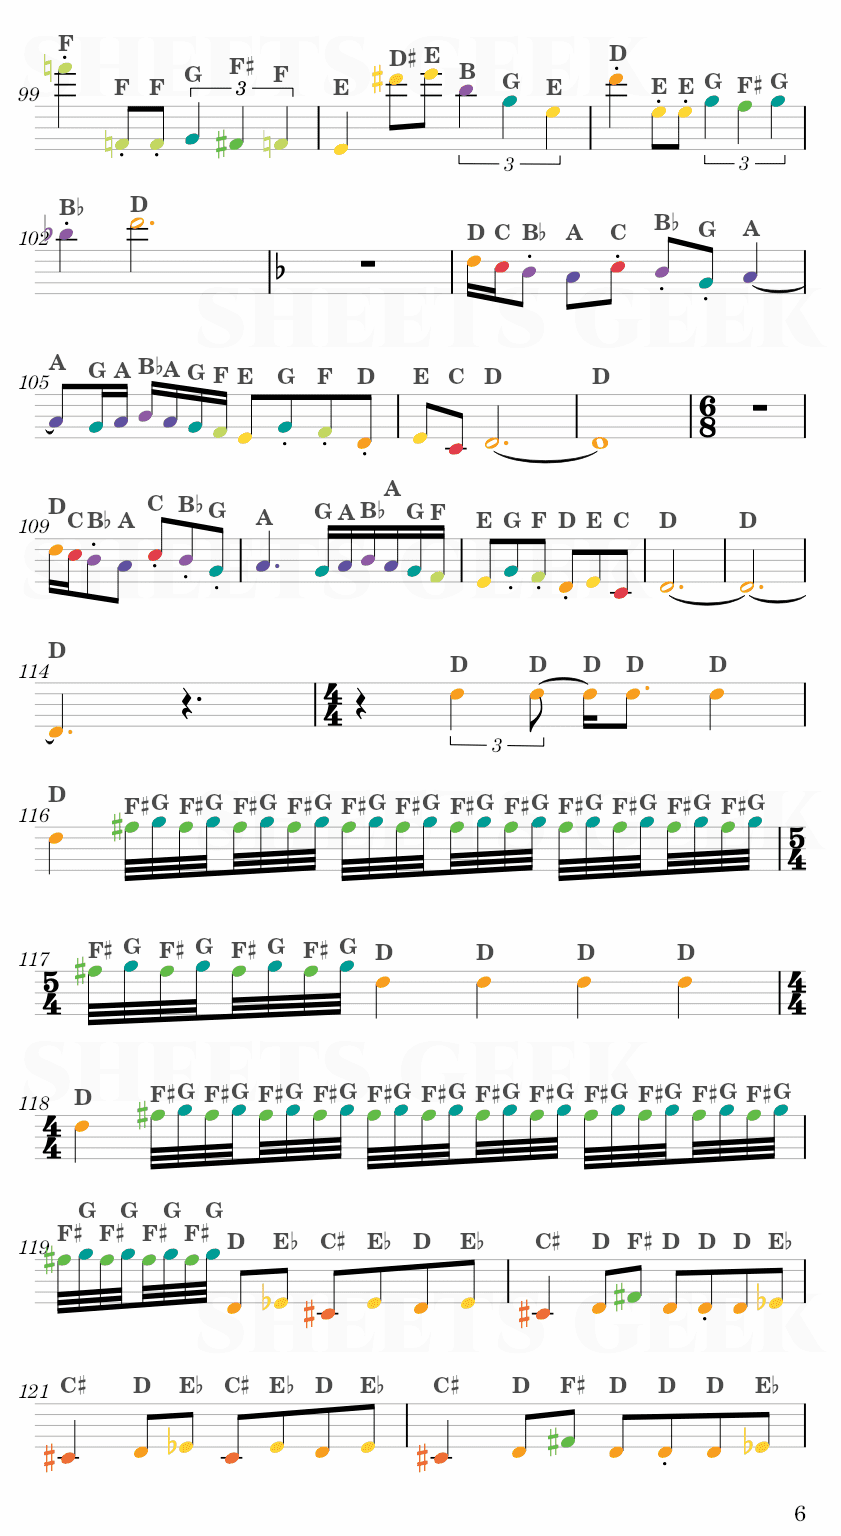 One Winged Angel - Final Fantasy VII Easy Sheet Music Free for piano, keyboard, flute, violin, sax, cello page 6